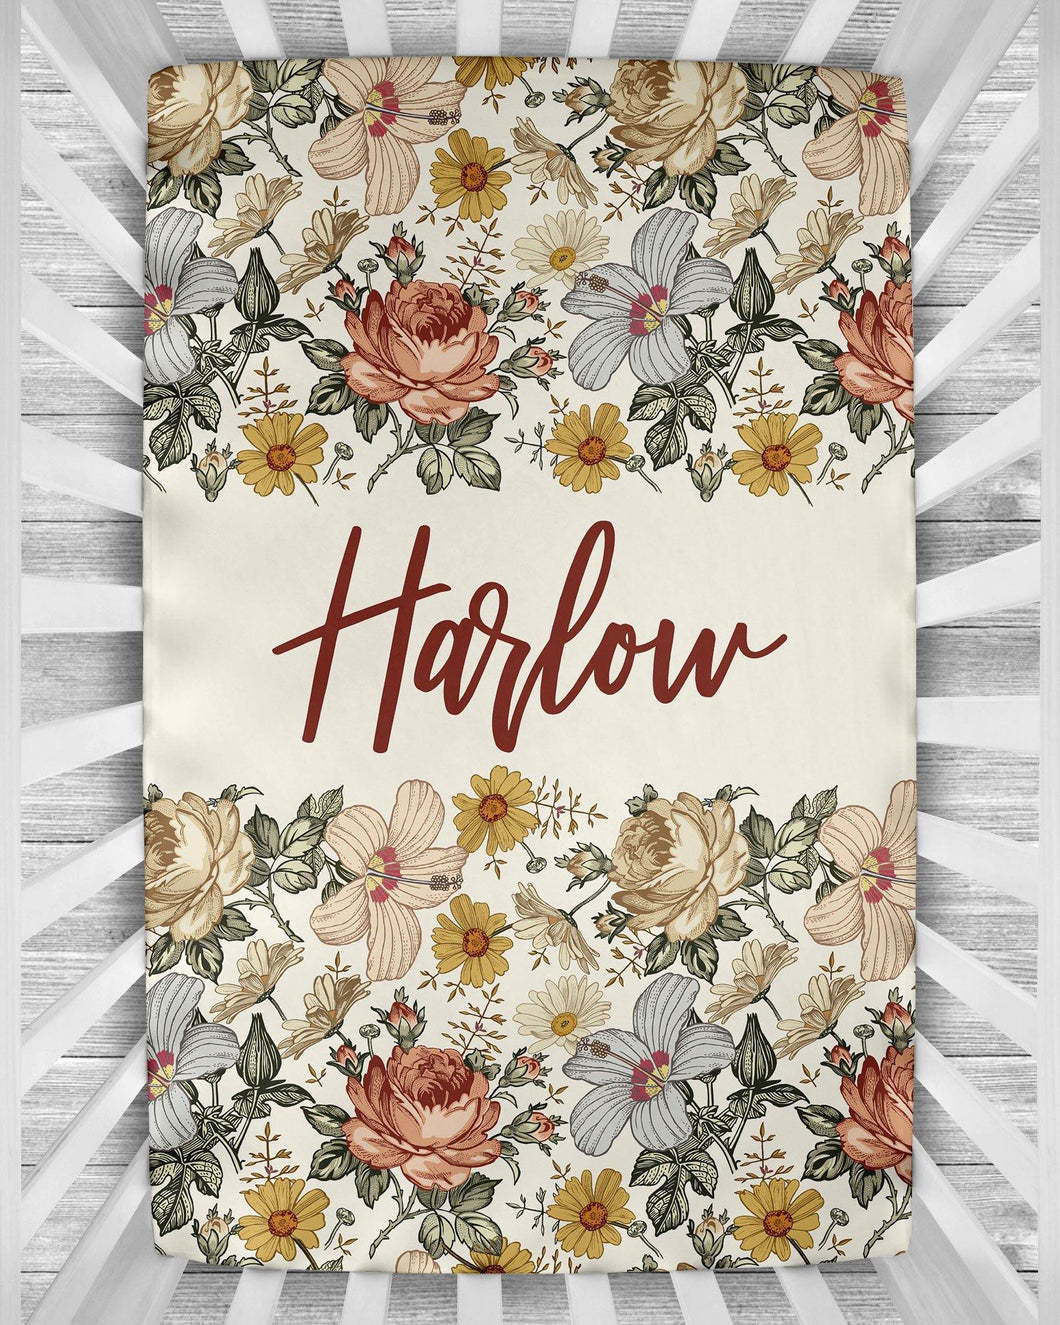 Personalized Crib Sheet - the Harlow collection - natural - The Little Arrows